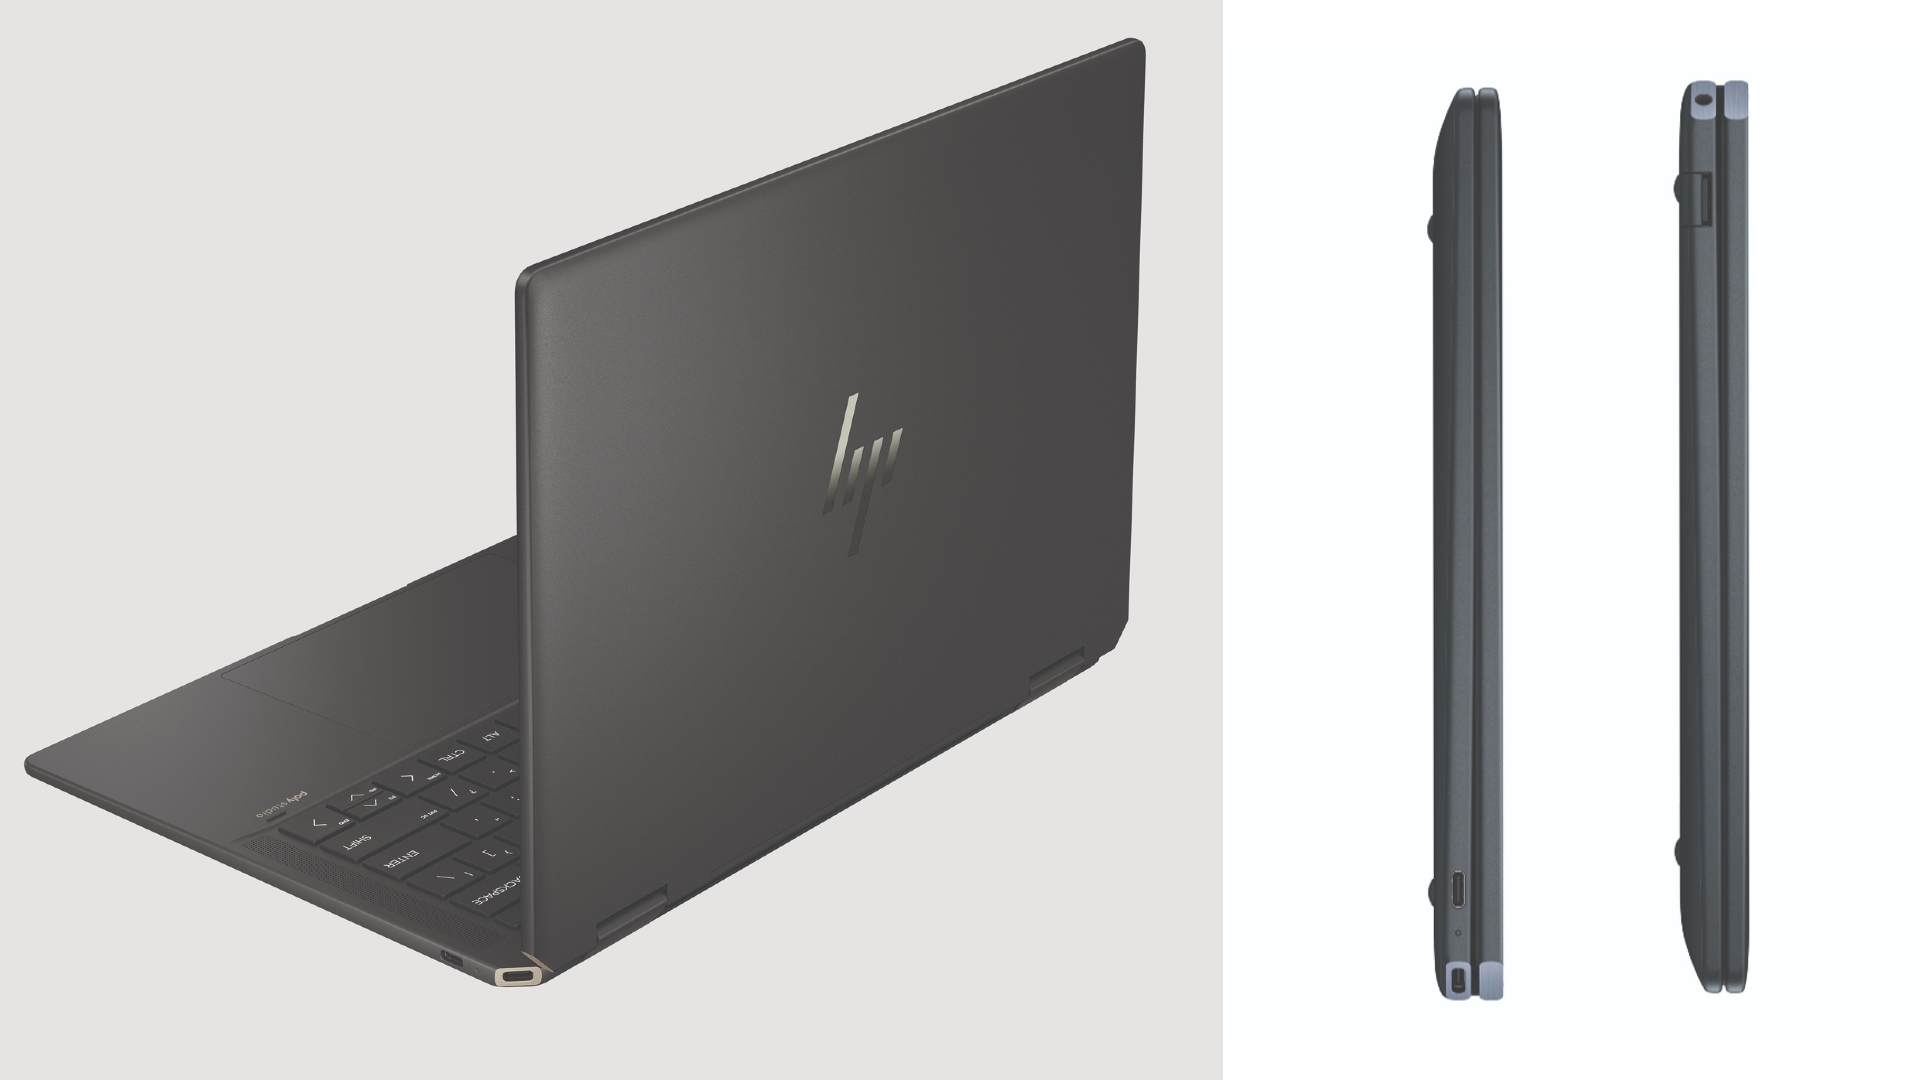 Image of the new HP Spectre x360.